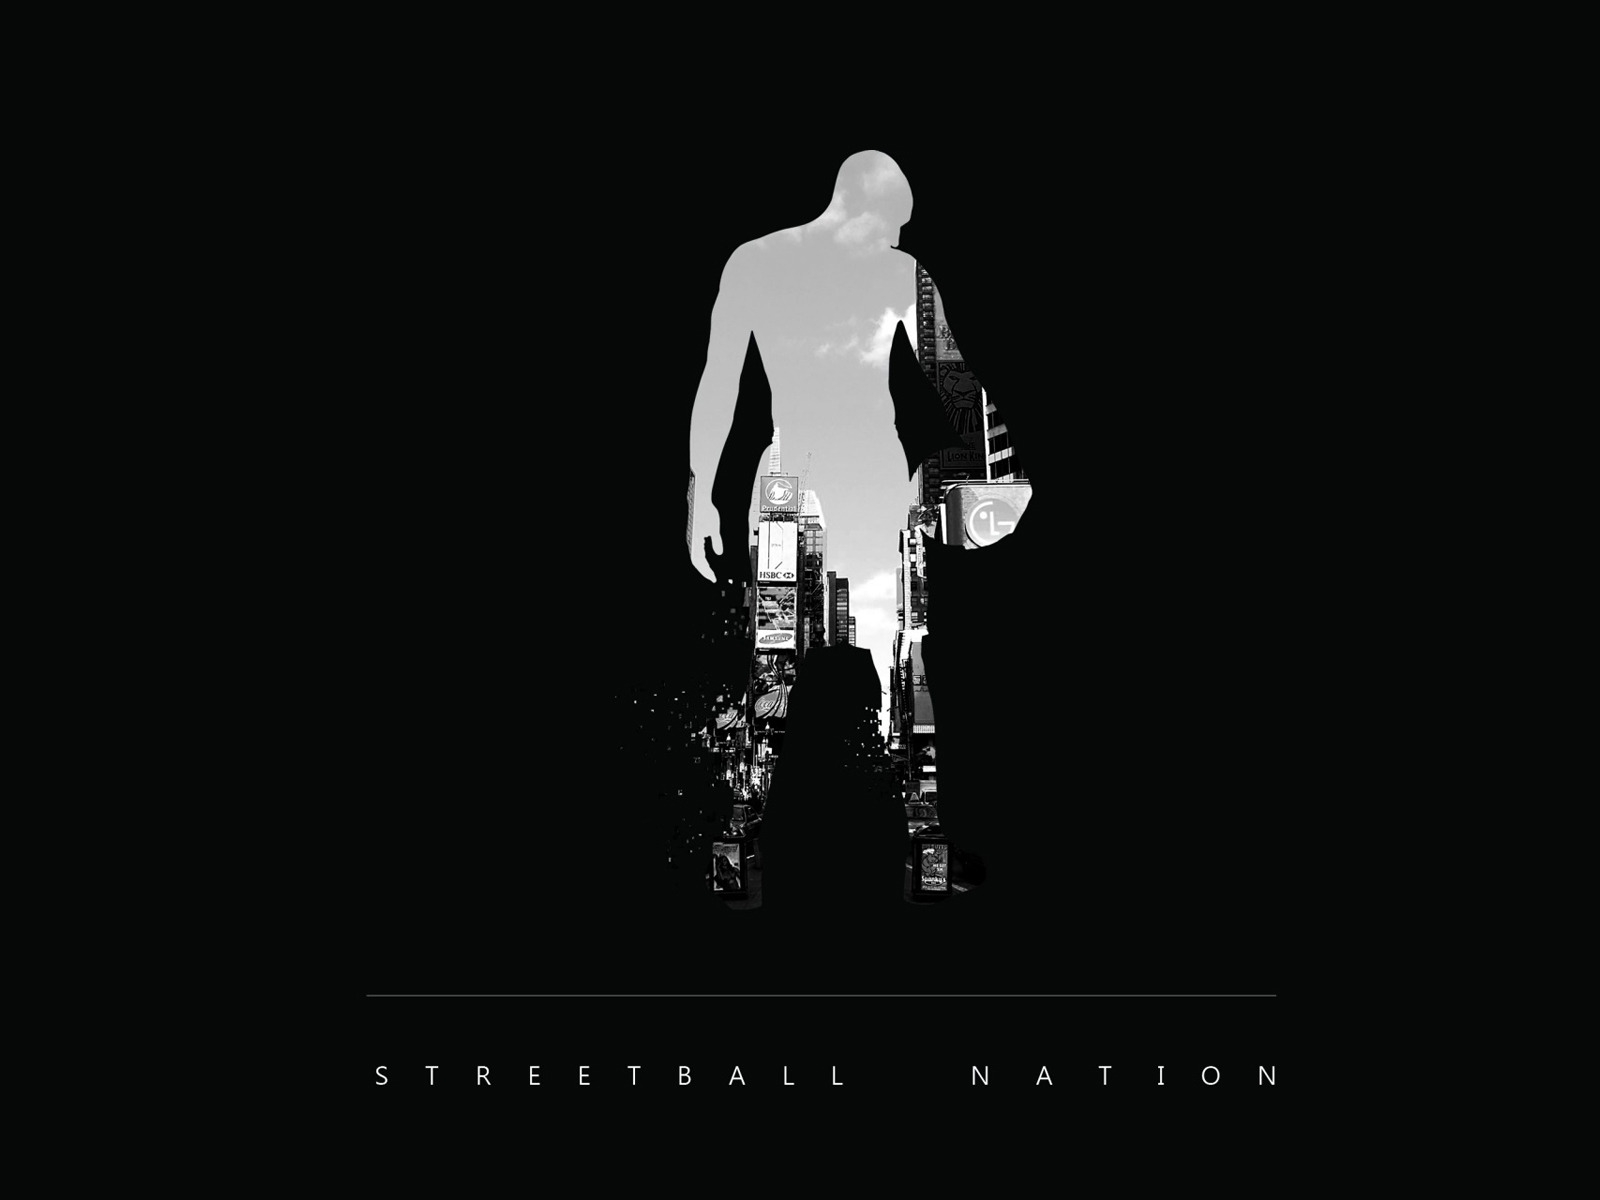 Streetball Nation for 1600 x 1200 resolution